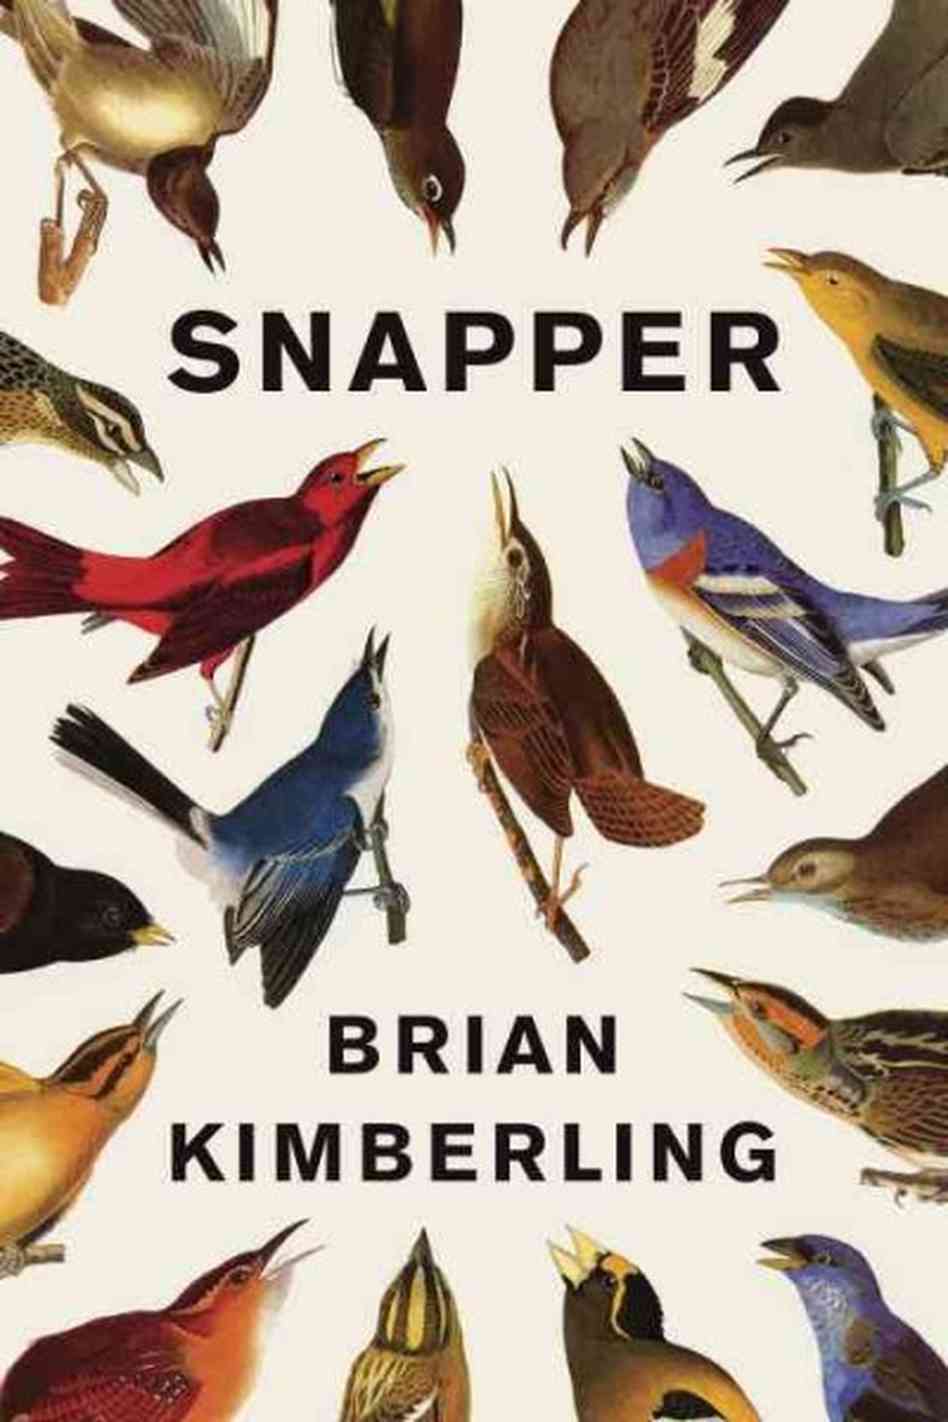 Book Review: Snapper by Brian Kimberling